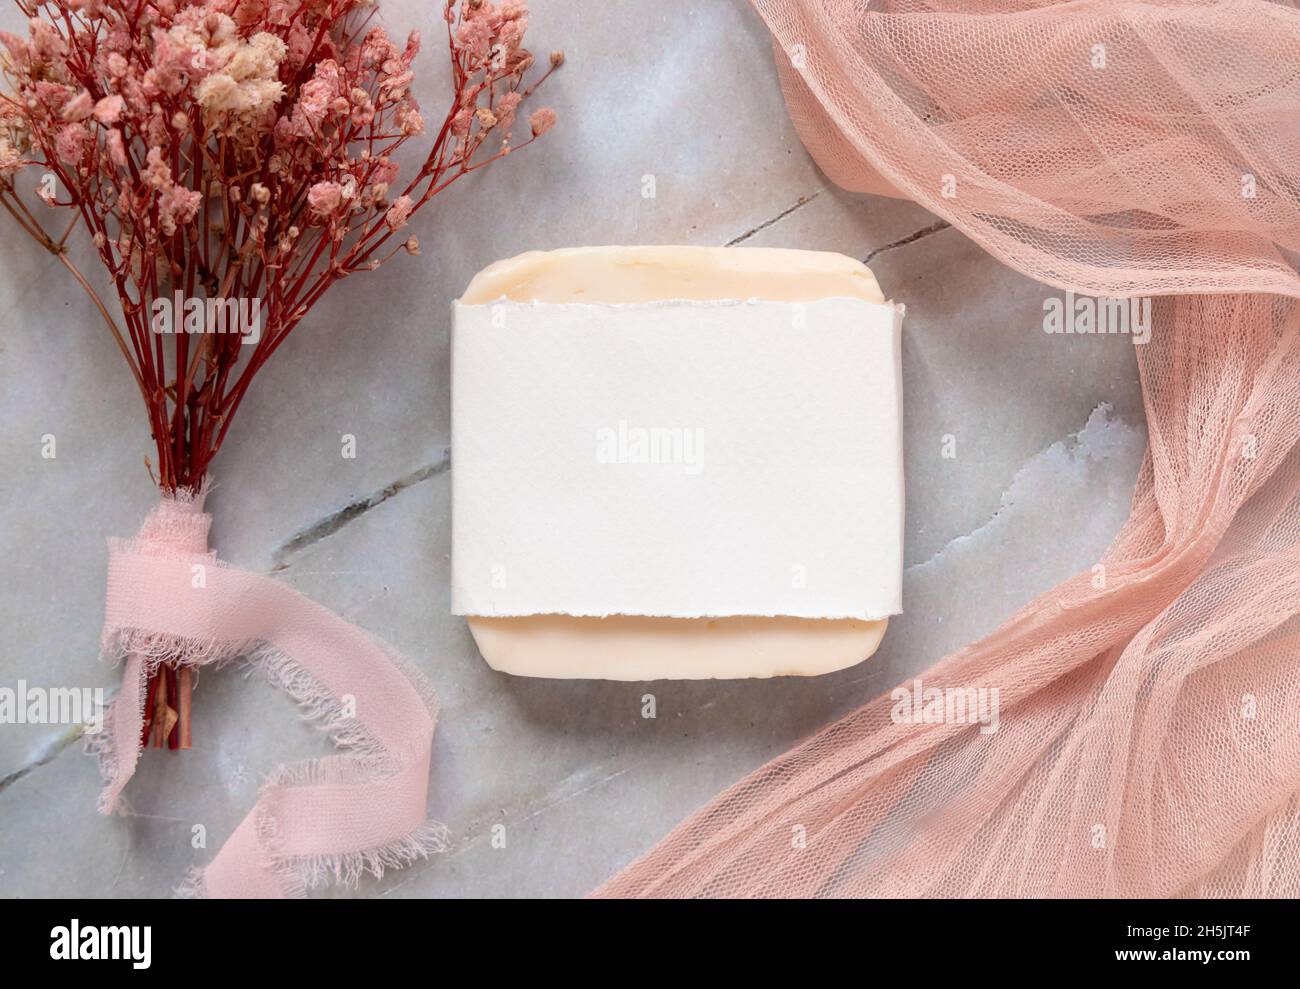 Handmade Soap bar laying on a marble table with paper wrapping package, with pink tulle fabric and dried flowers around, top view. Soap mockup flat la Stock Photo